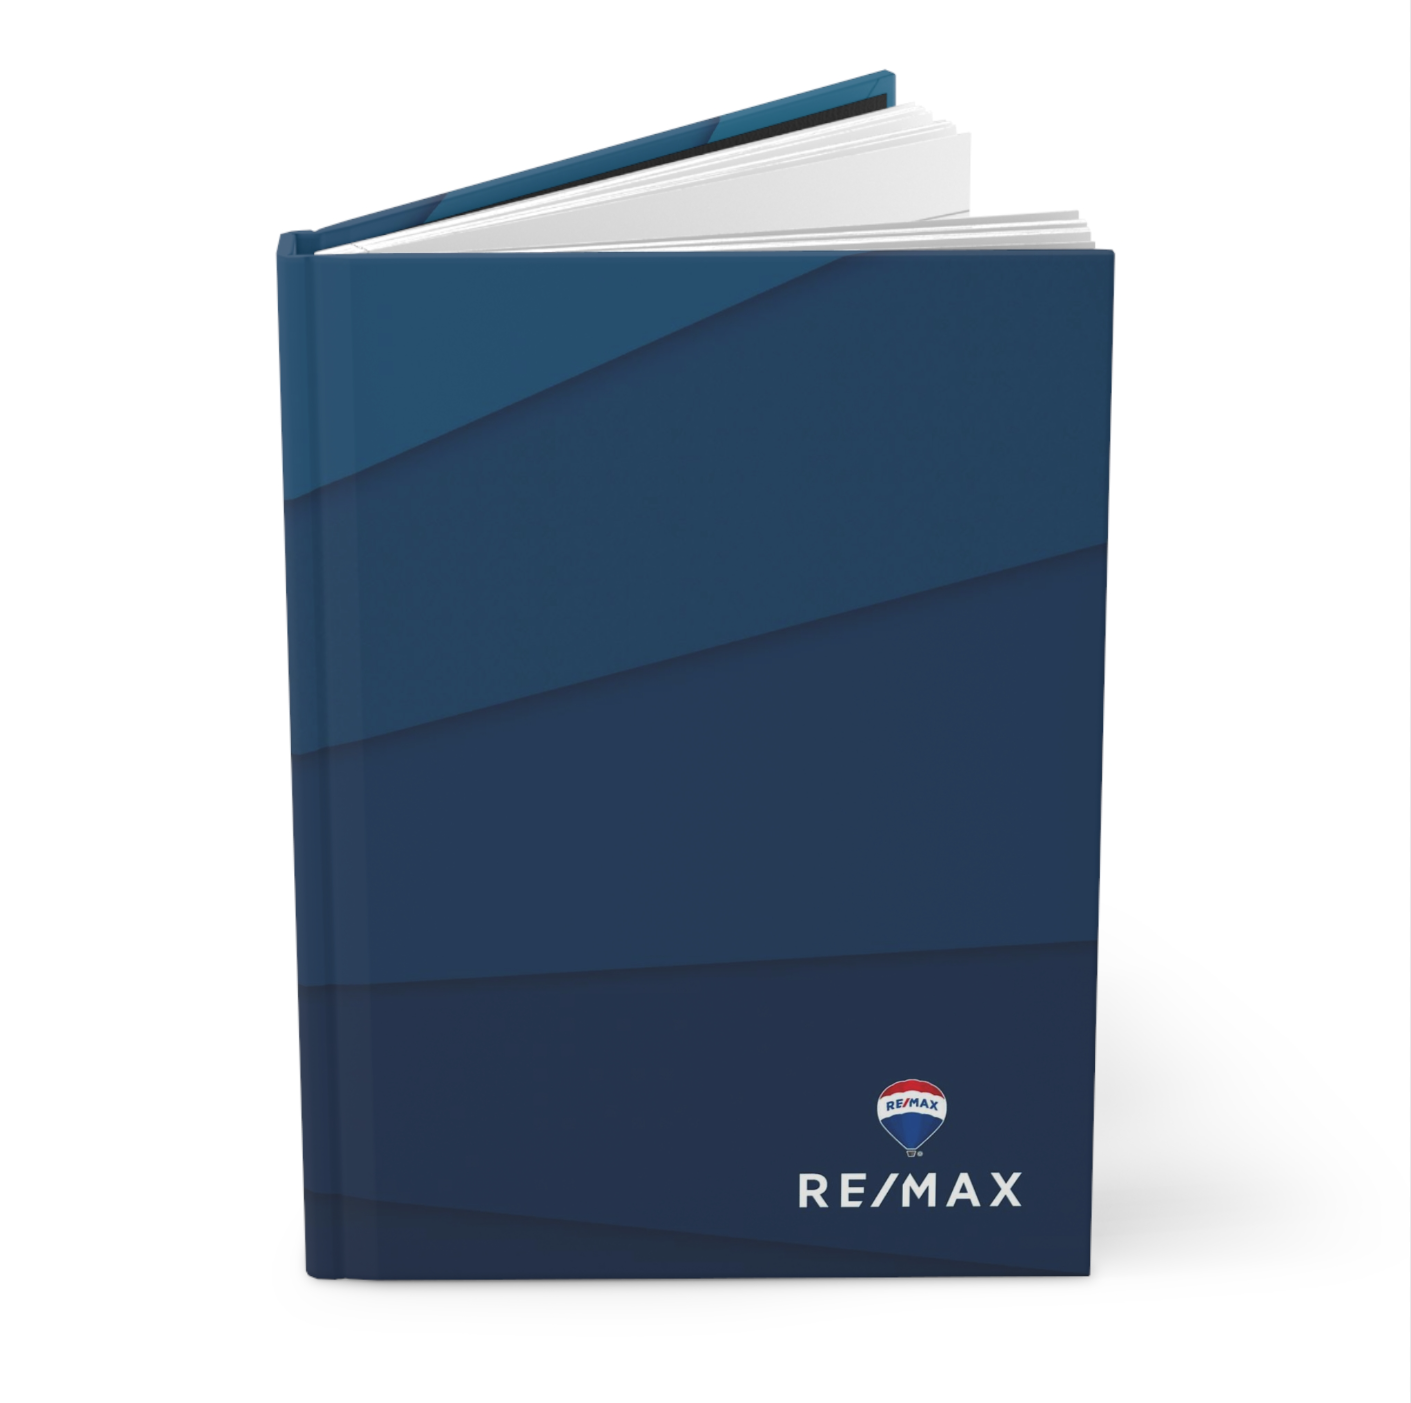 RE/MAX Full Color Hardcover Binders Blue Ombre (from as low as $10.46 per cover)